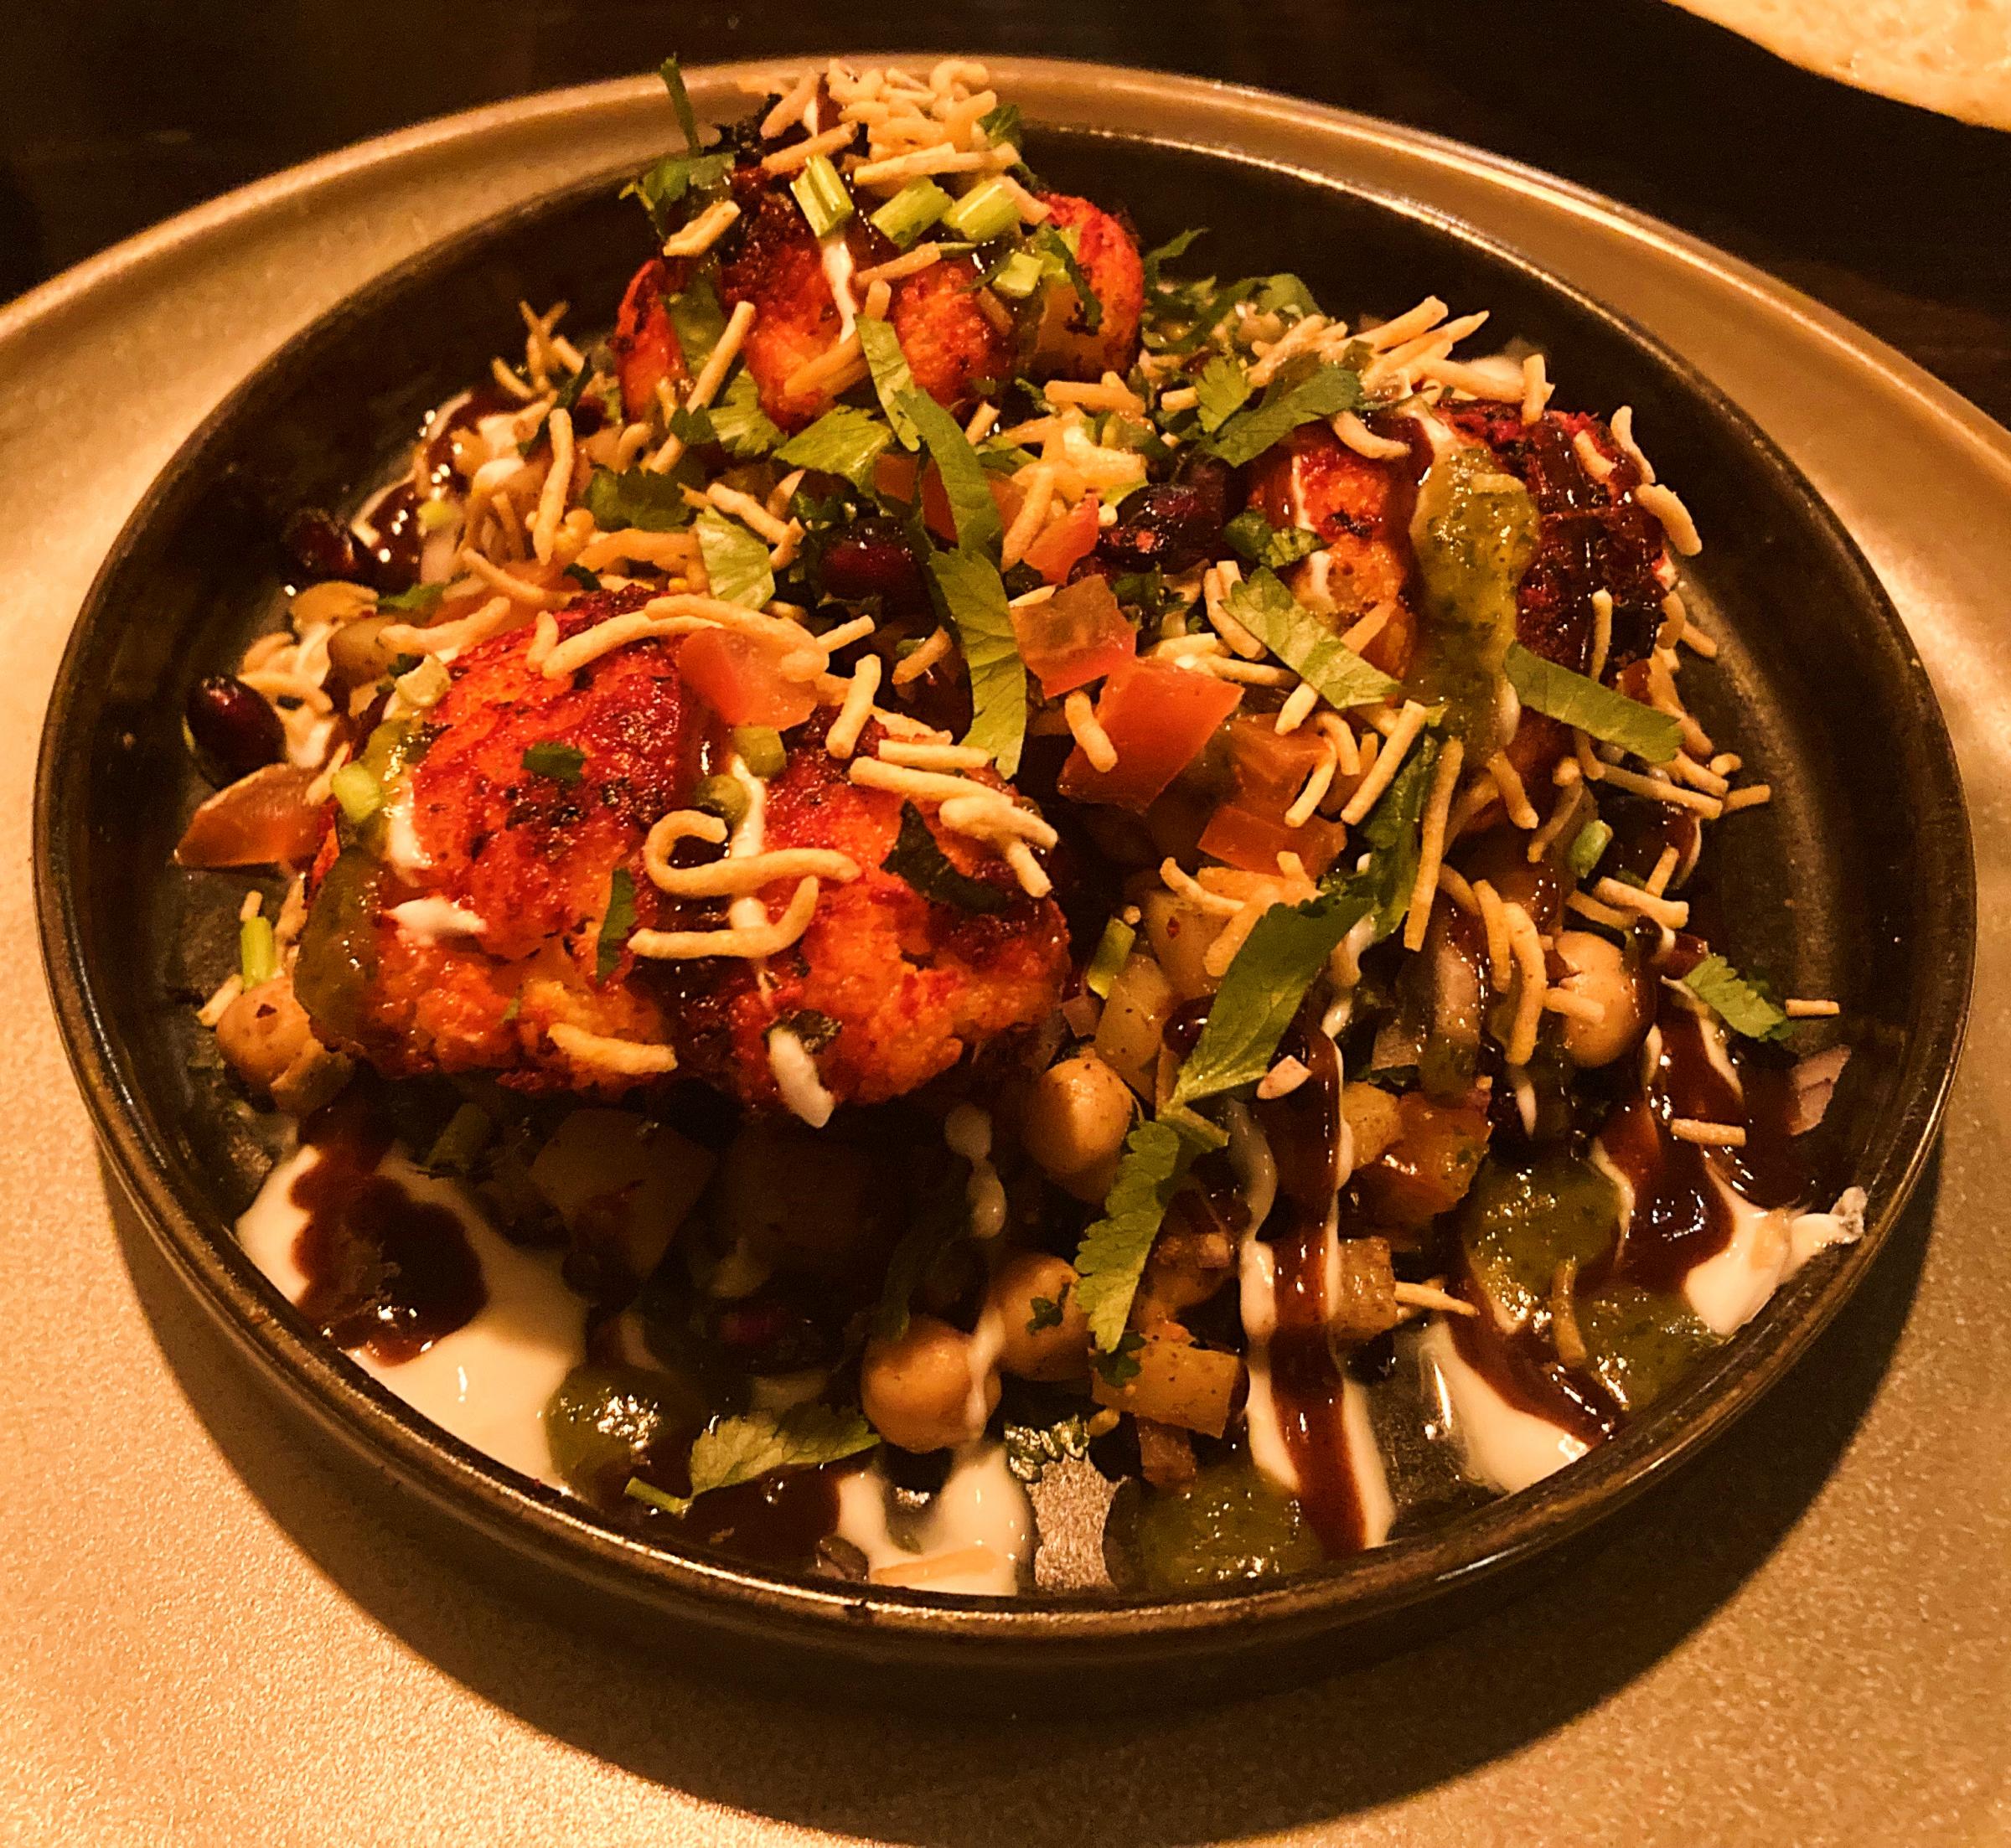 Gully Gobi Chaat - the cauliflower dish that Petra raved about